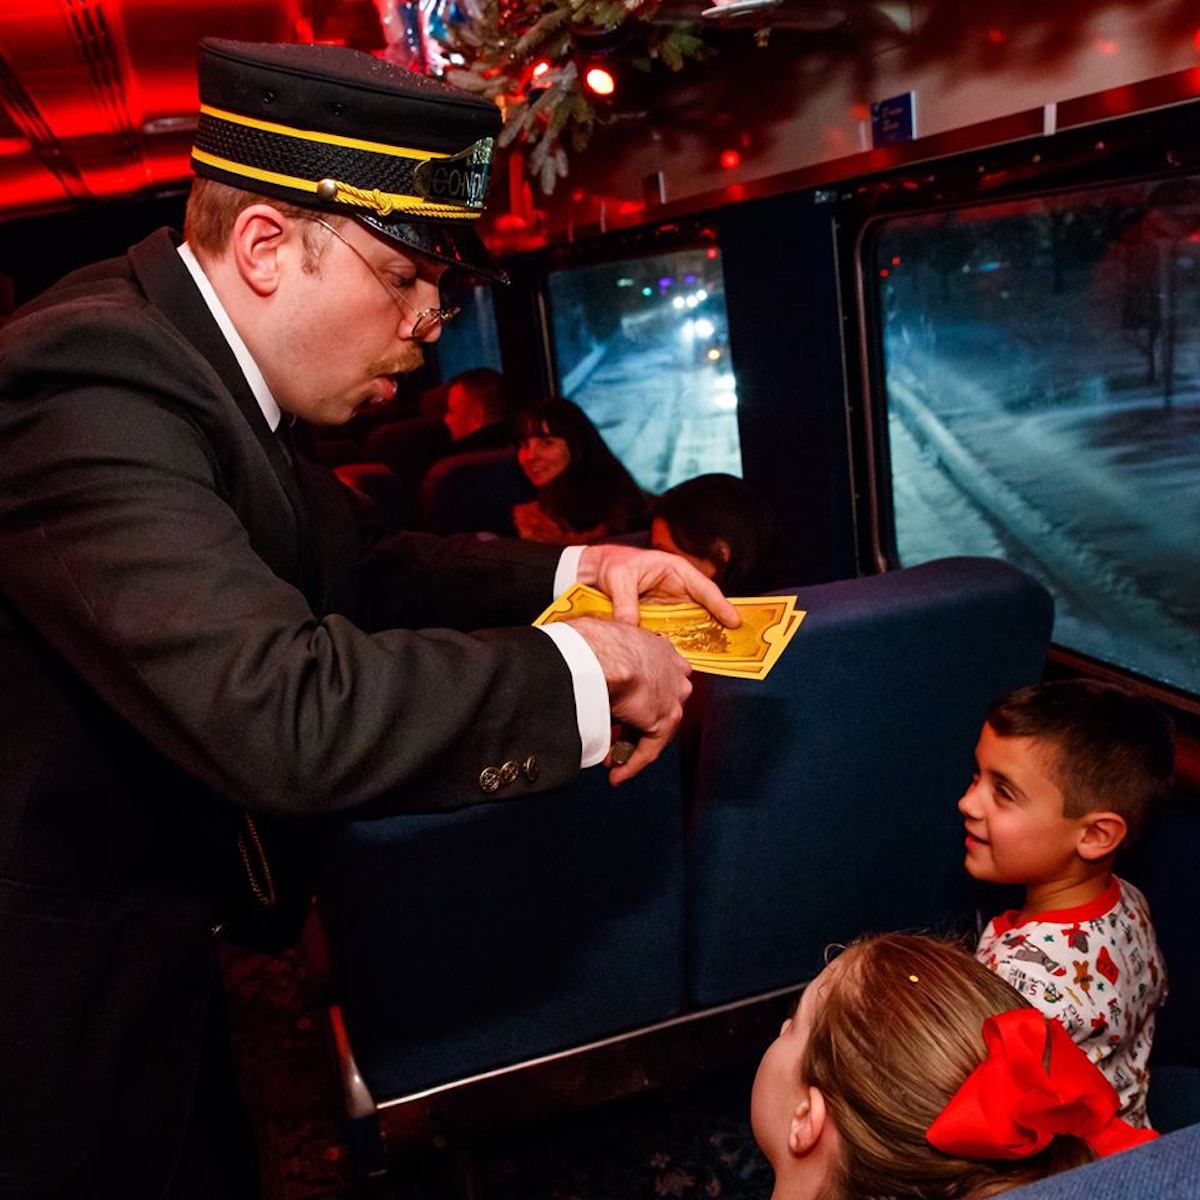 Book a Ride on The Polar Express Train Departing From 50 Locations!